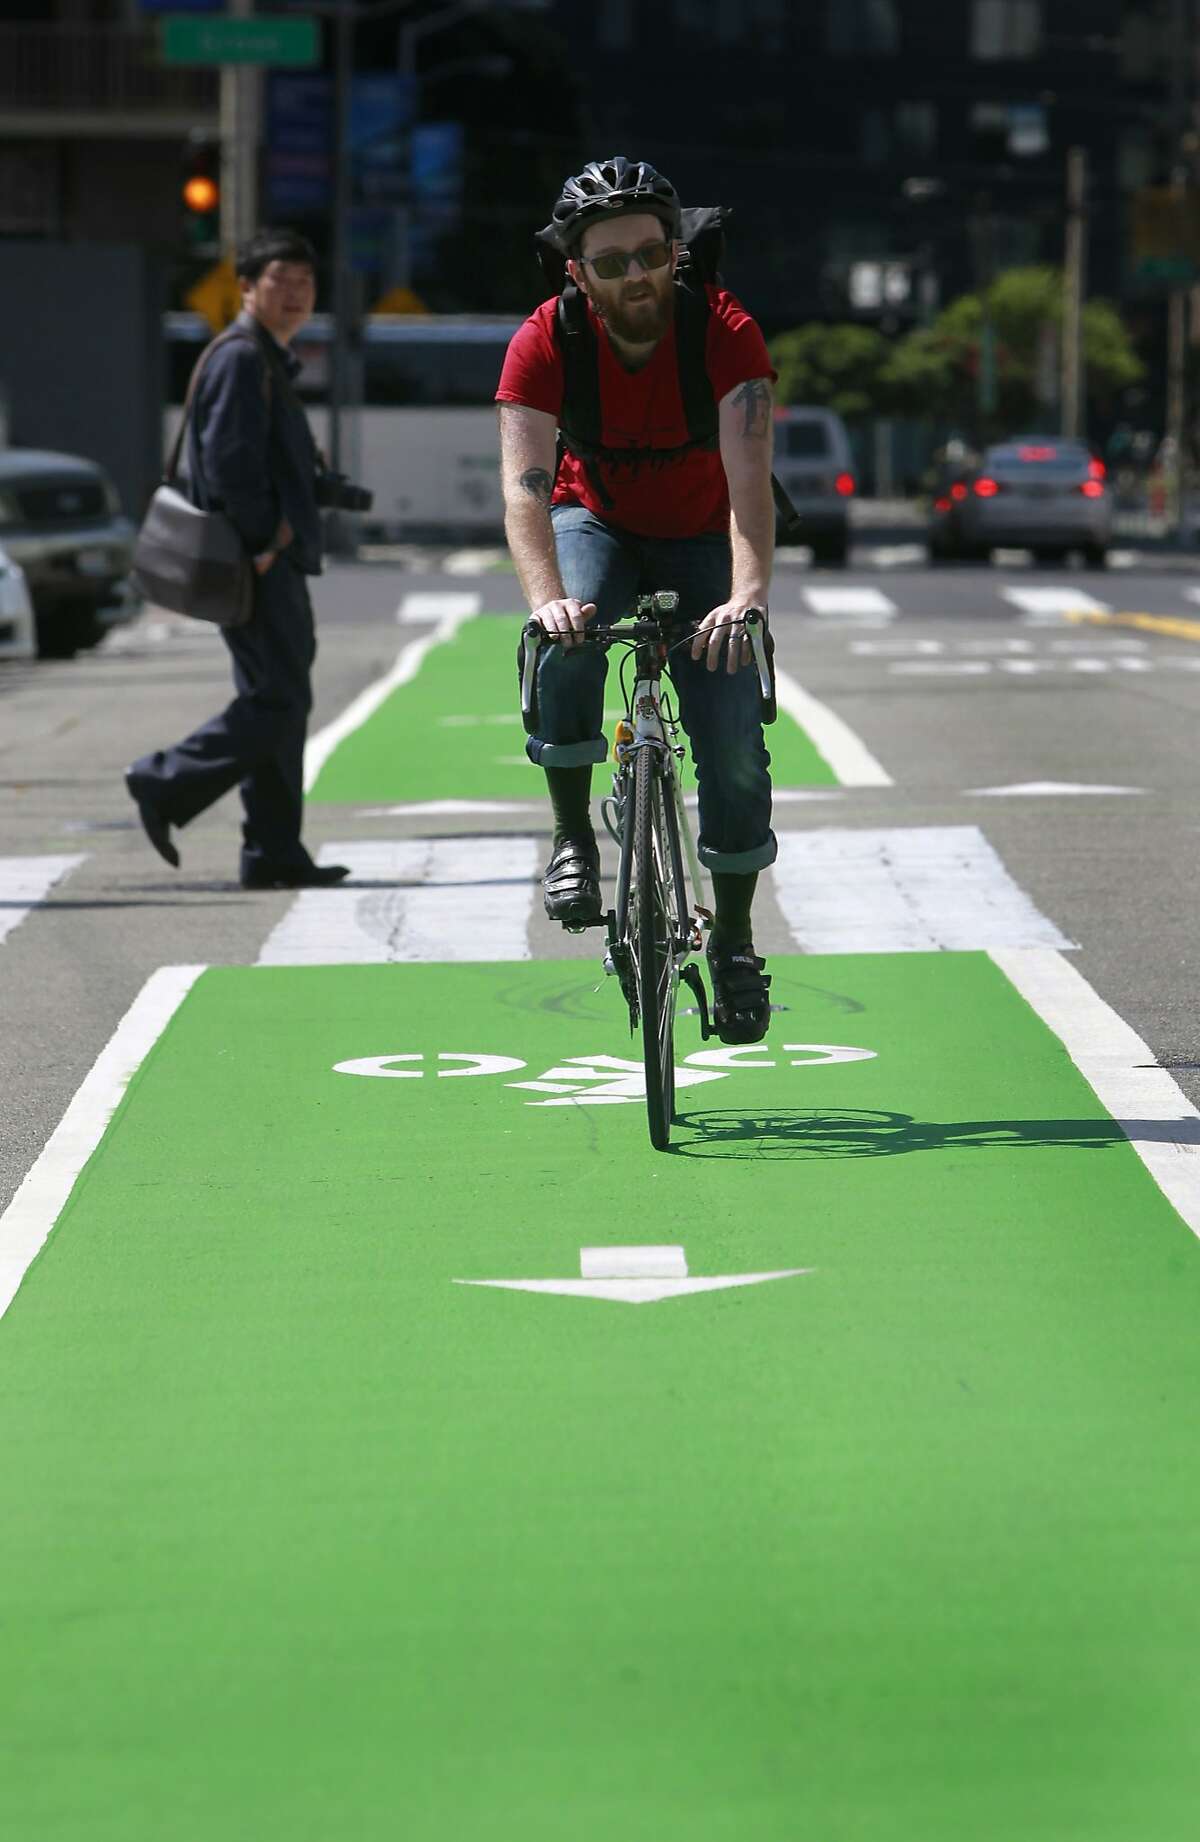 Jared Shoupe rides his bicycle on the new Polk Street bicycle lane past City Hall in San Francisco, Calif. on Saturday, May 24, 2014.